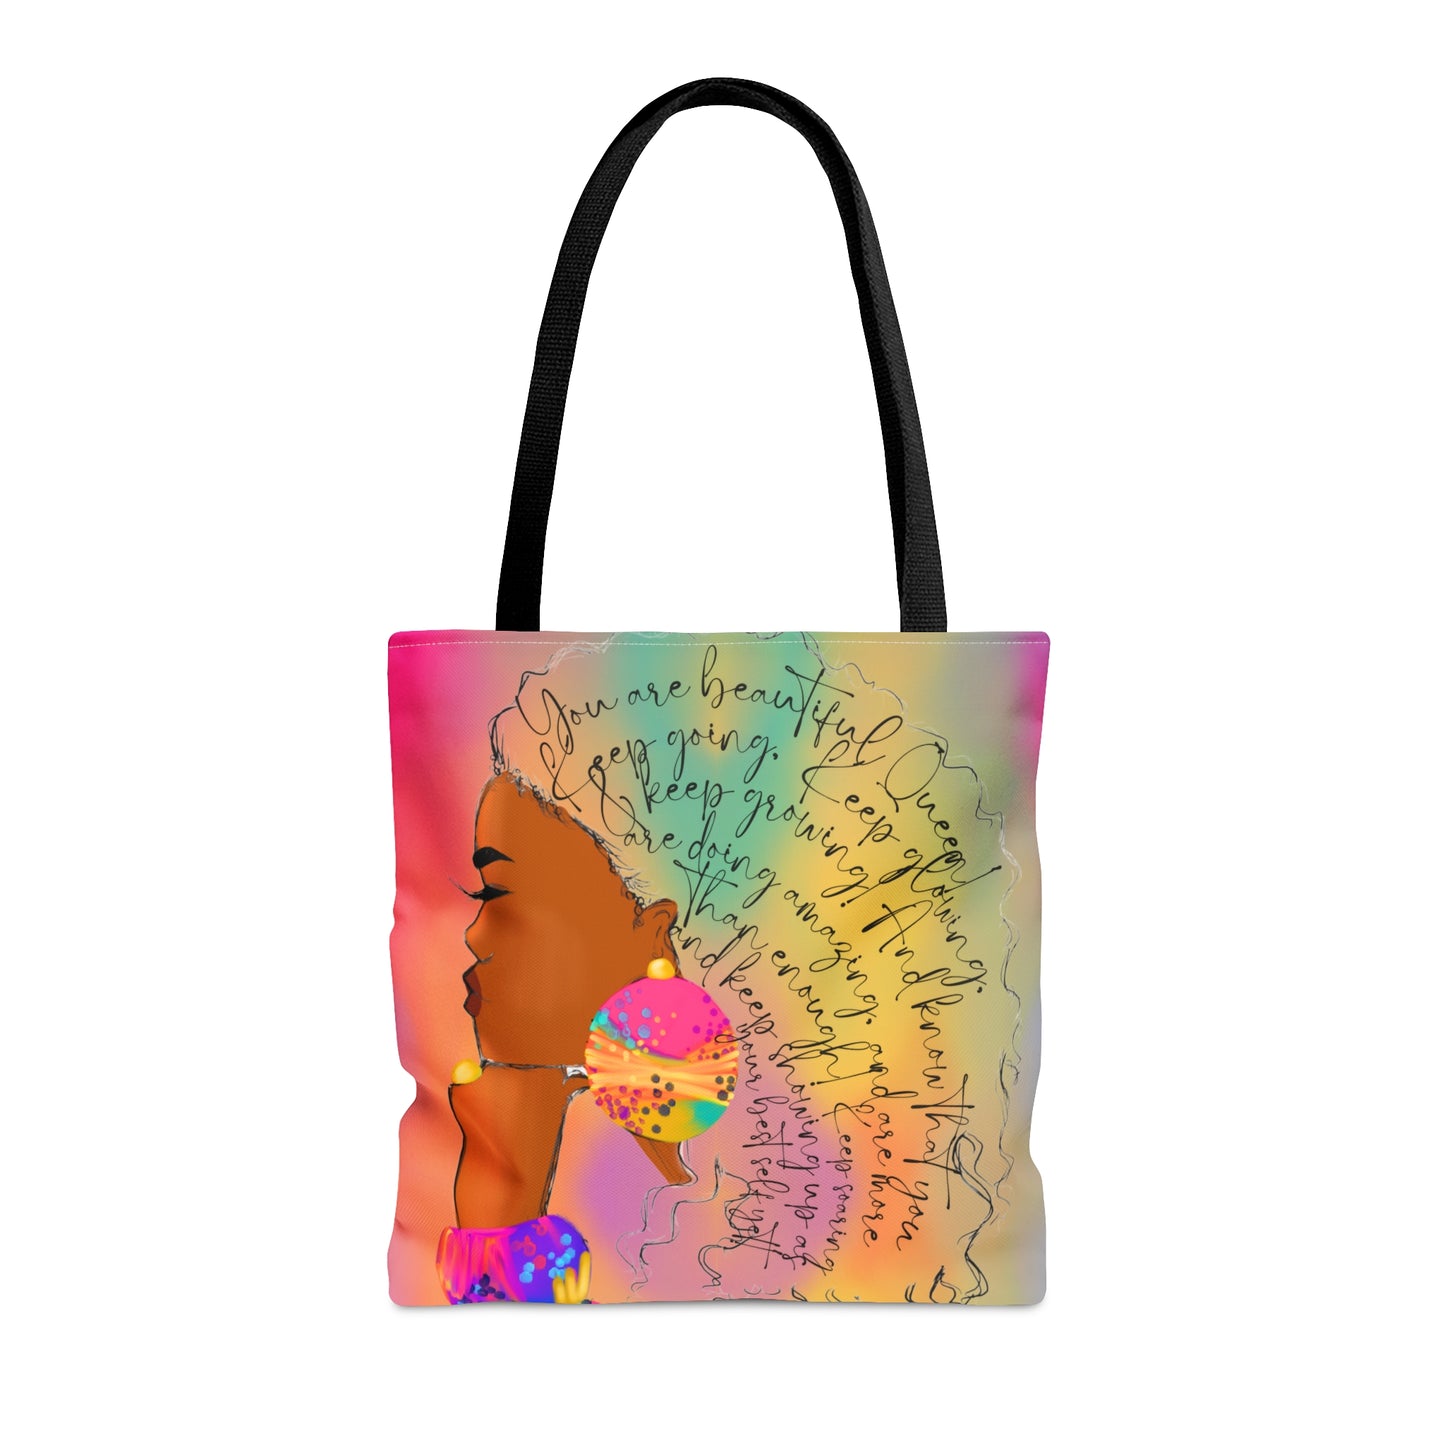 You Are Beautiful, Queen! - Tote Bag